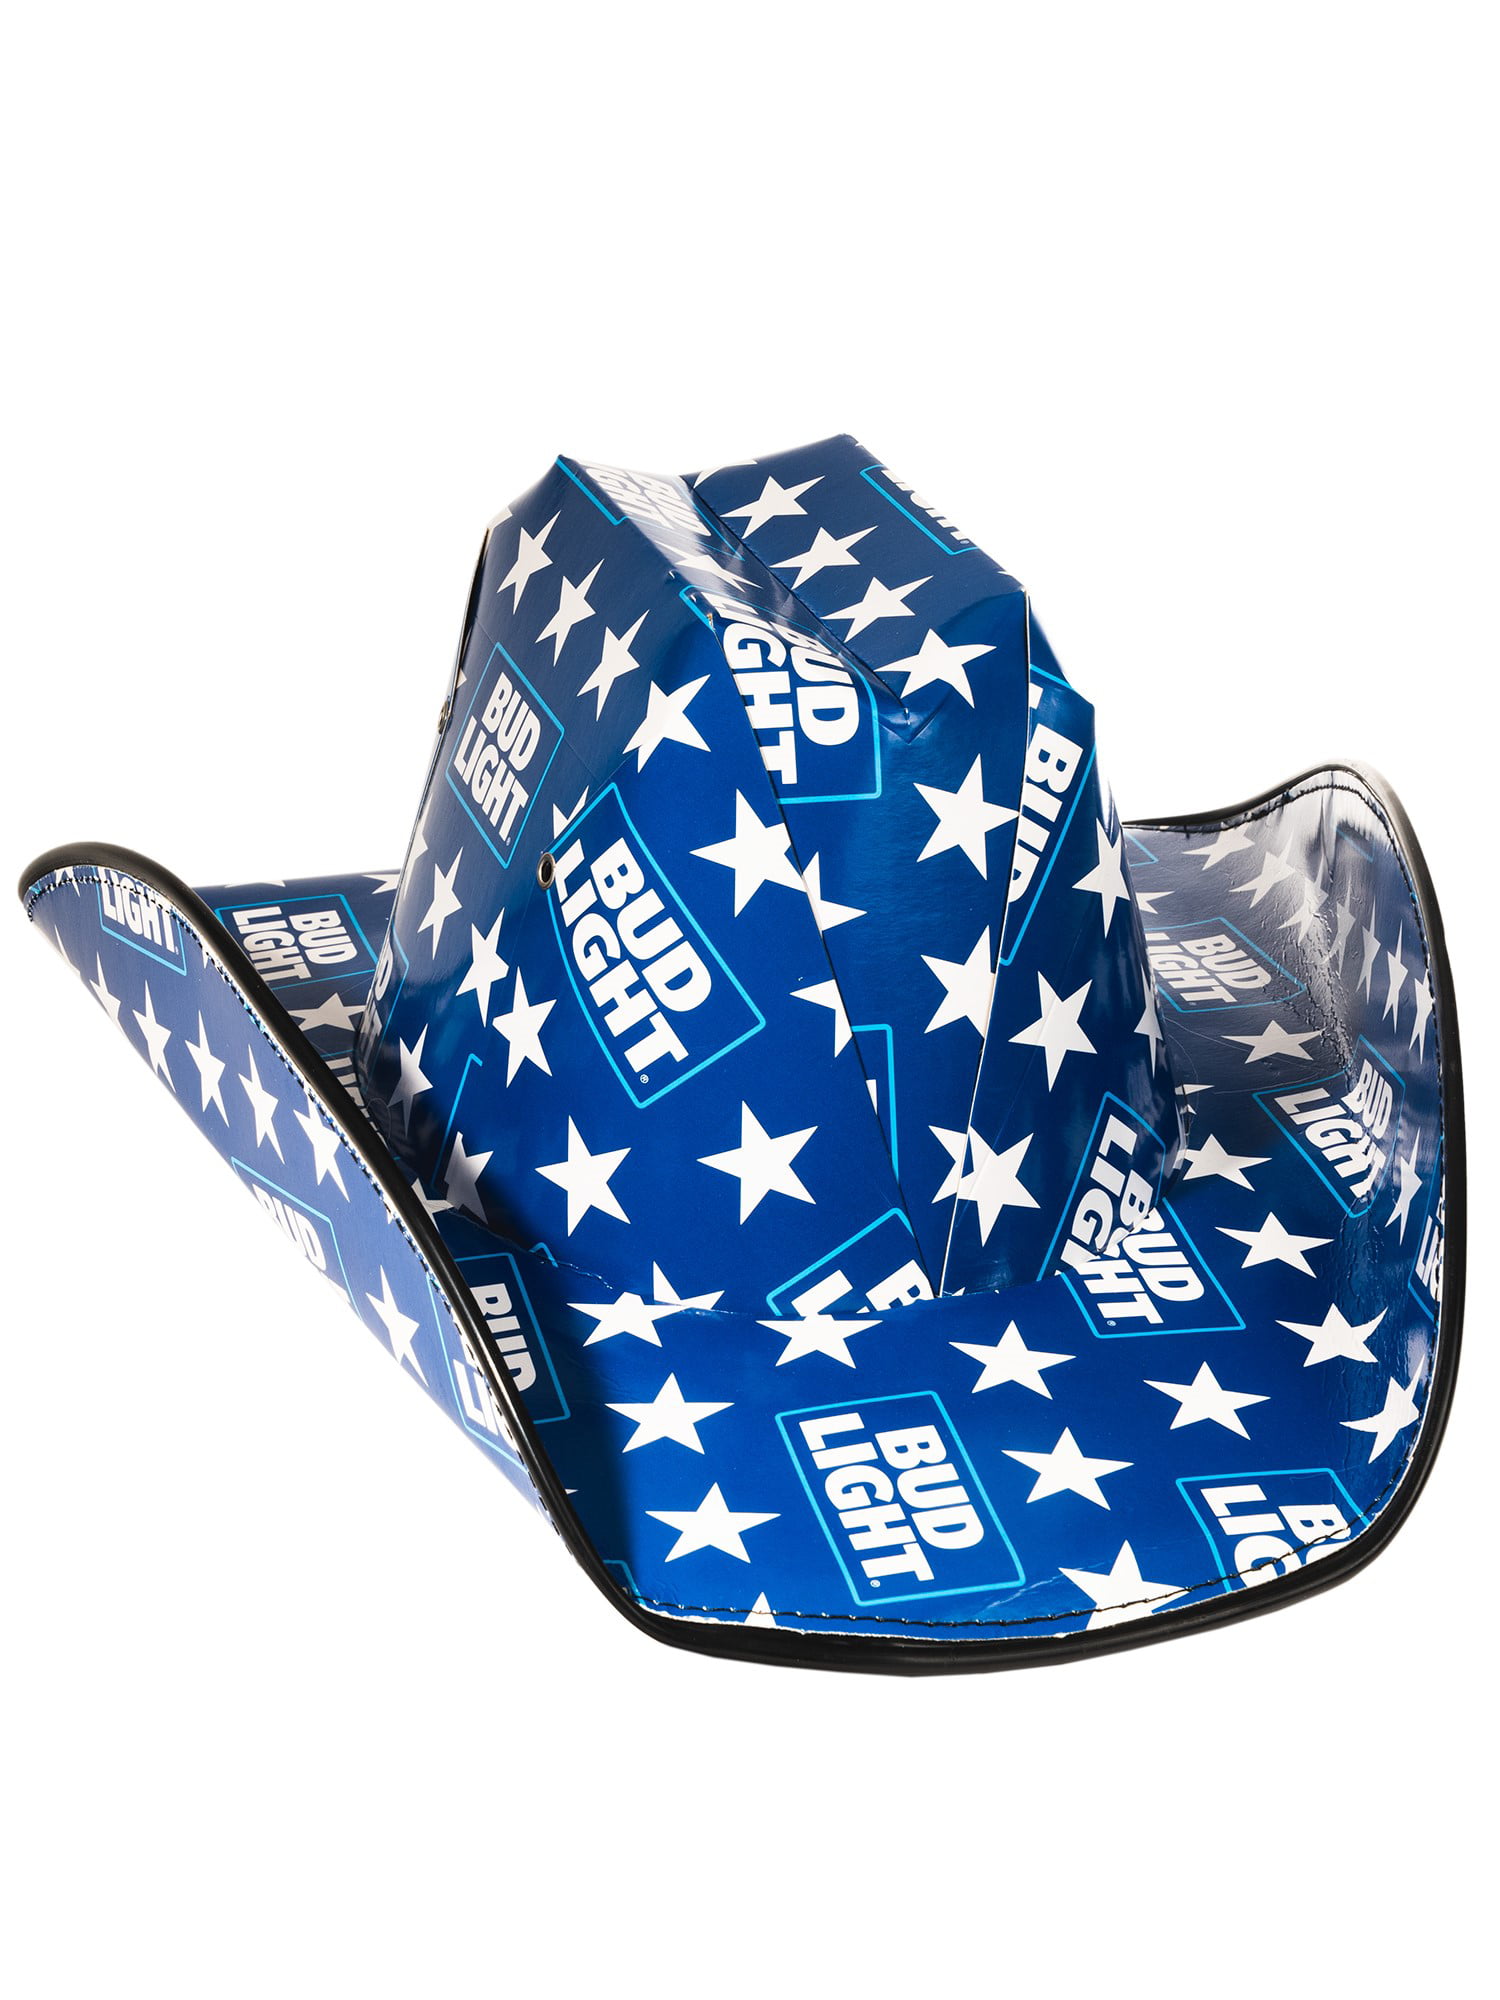 NEW COWBOY DRINK BLUE WESTERN HAT  novelty party hats beer MENS GIRLS western 